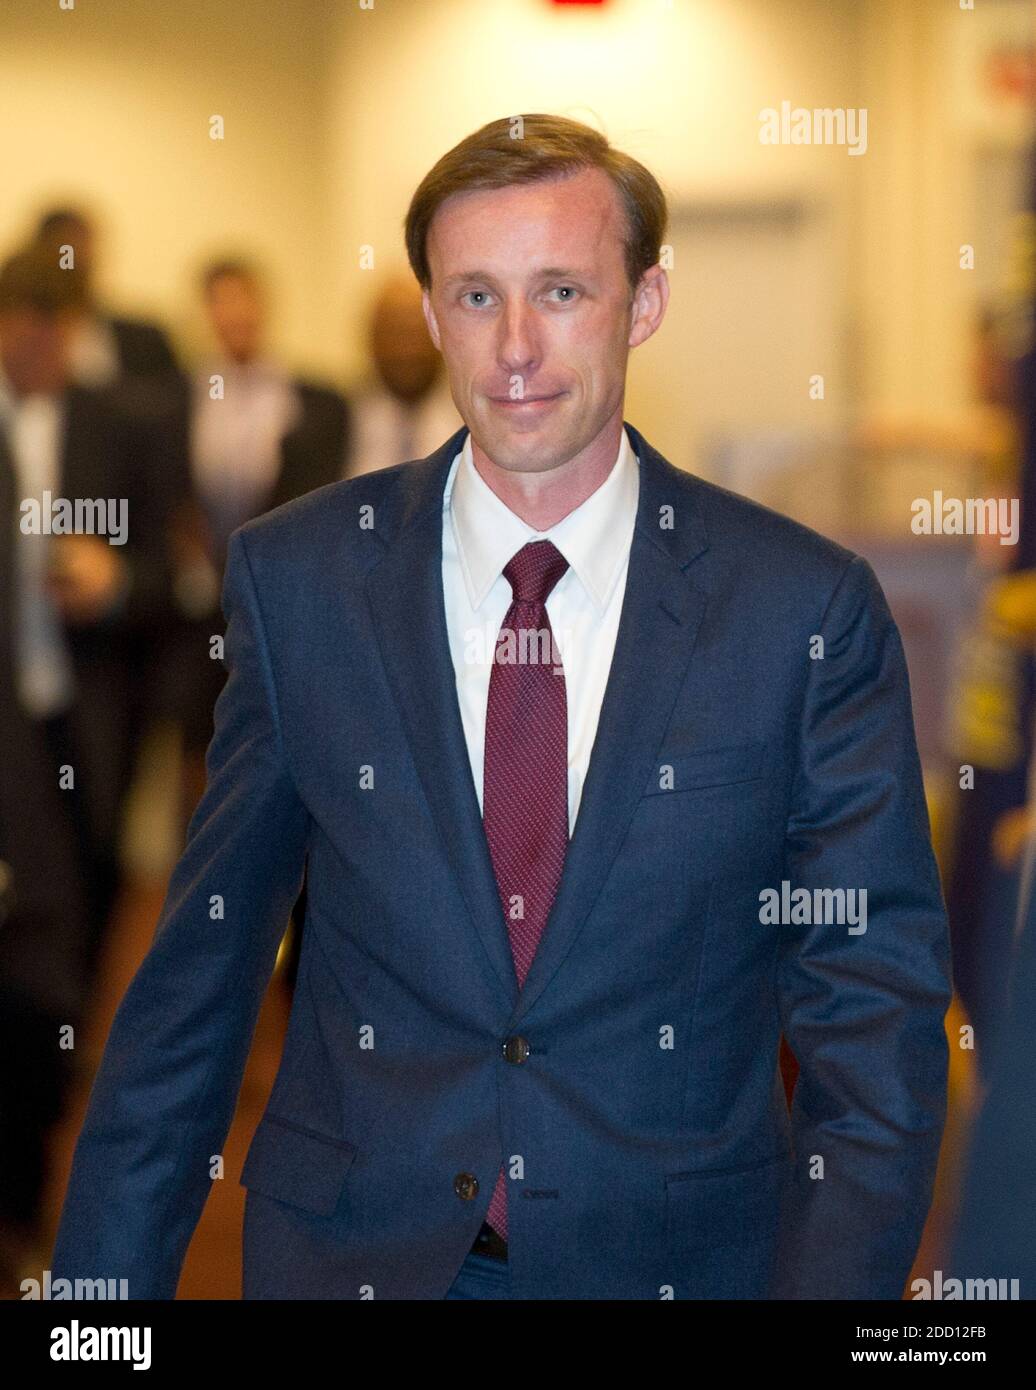 Jake Sullivan, top foreign policy advisor to Hillary Rodham Clinton's 2016 election campaign, departs following his deposition to the US House Select Committee to Investigate the 2012 Benghazi Attack, in the US Capitol in Washington, DC on Friday, September 4, 2015. Credit: Ron Sachs / CNP (RESTRICTION: NO New York or New Jersey Newspapers or newspapers within a 75 mile radius of New York City) | usage worldwide Stock Photo